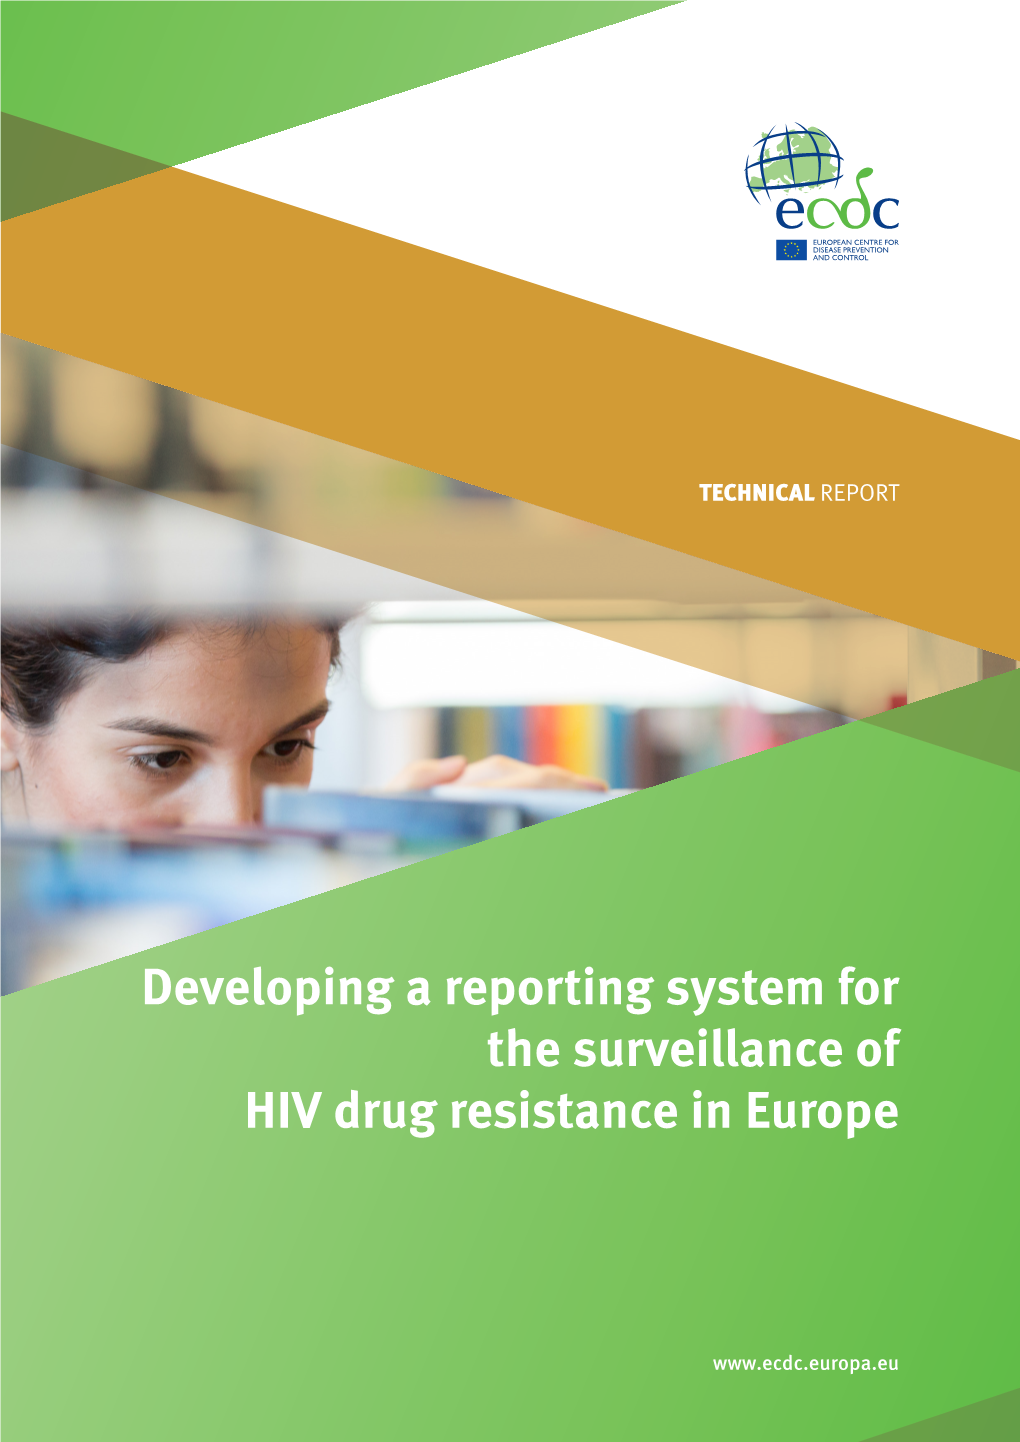 Developing a Reporting System for the Surveillance of HIV Drug Resistance in Europe